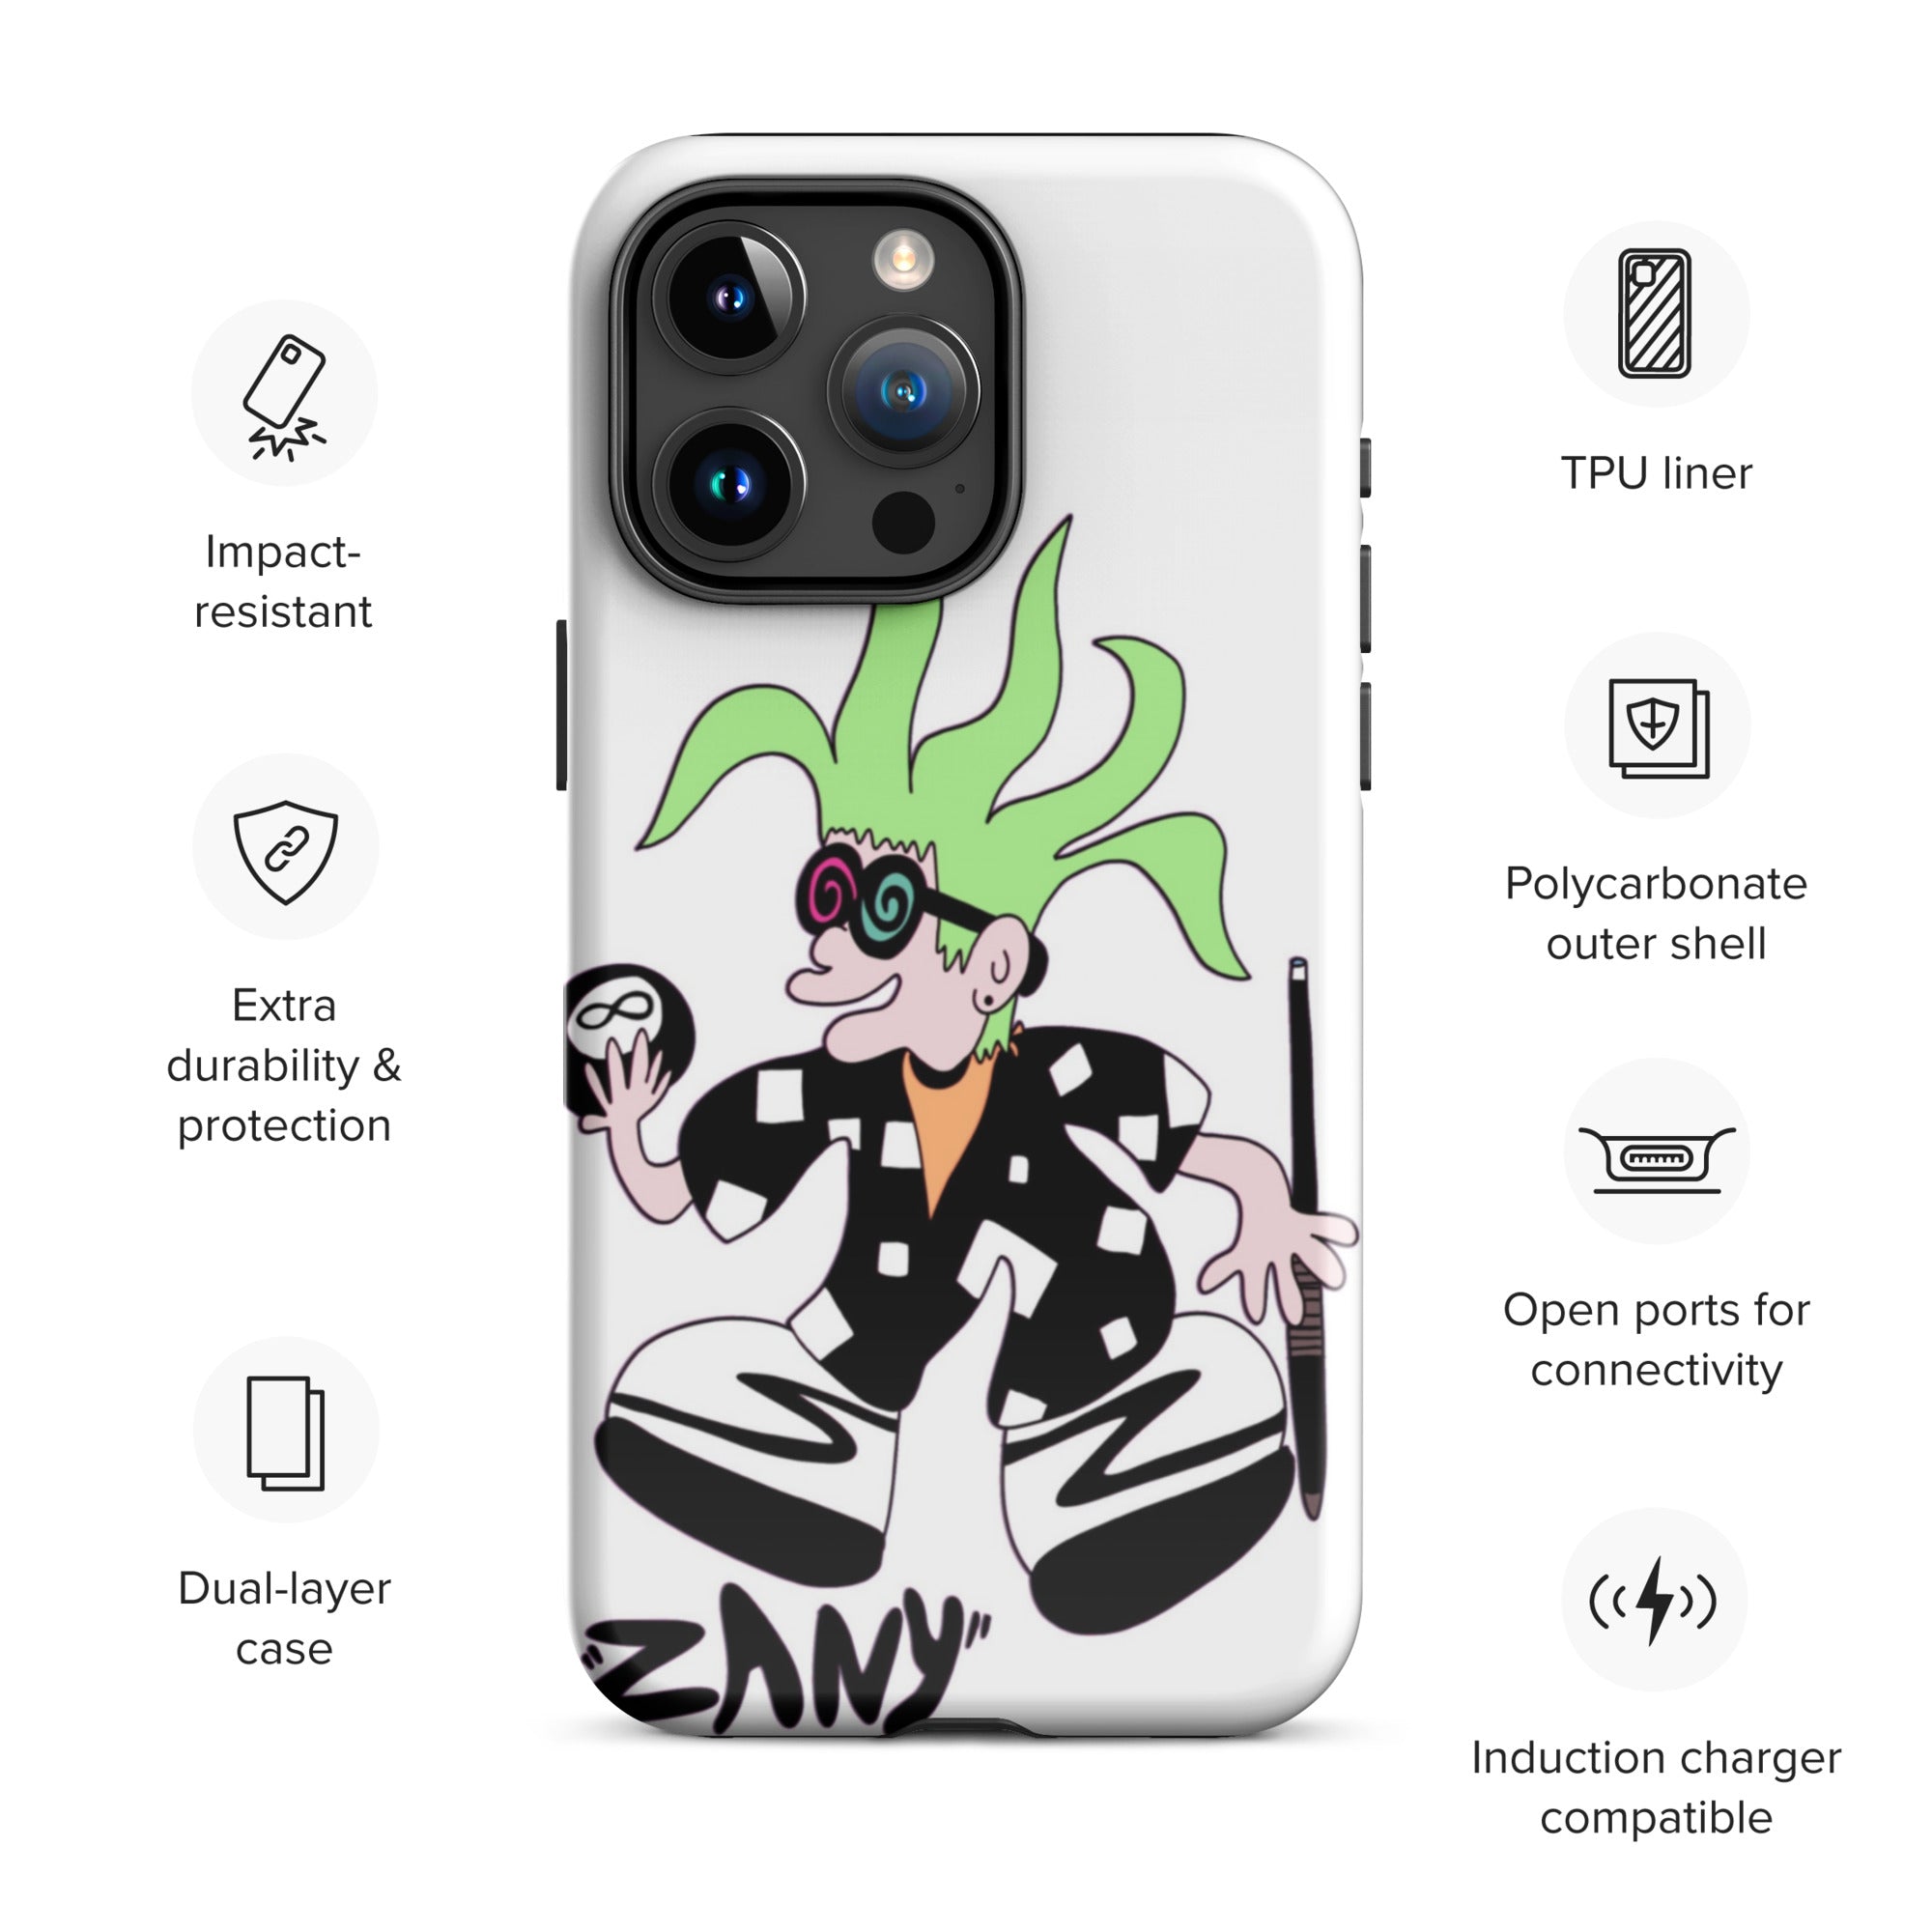 tough-case-for-iphone-glossy-iphone-15-pro-max-front-65a4de9041805.jpg